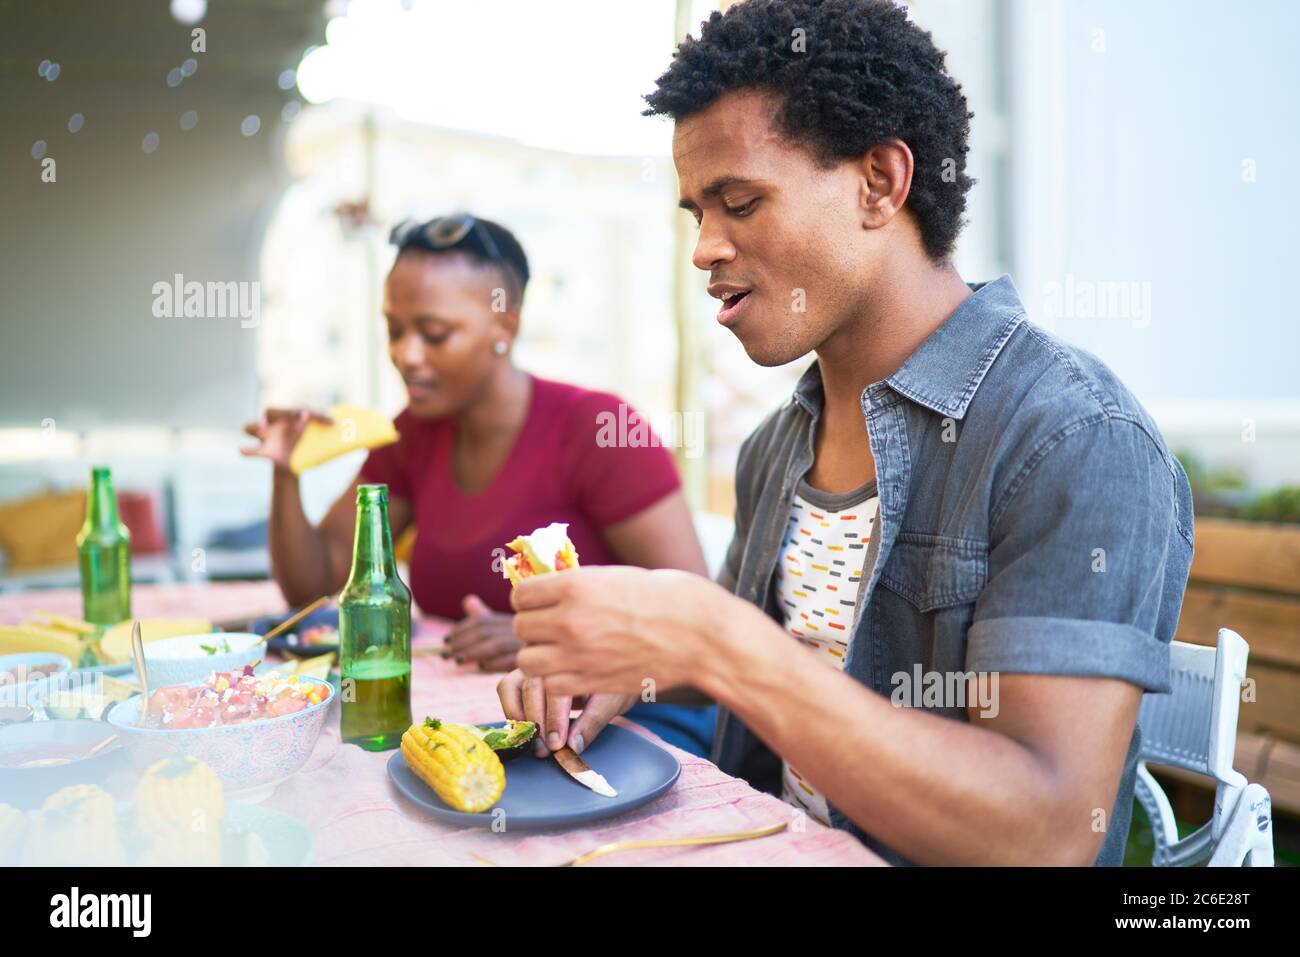 Young man eating taco lunch at patio table Stock Photo